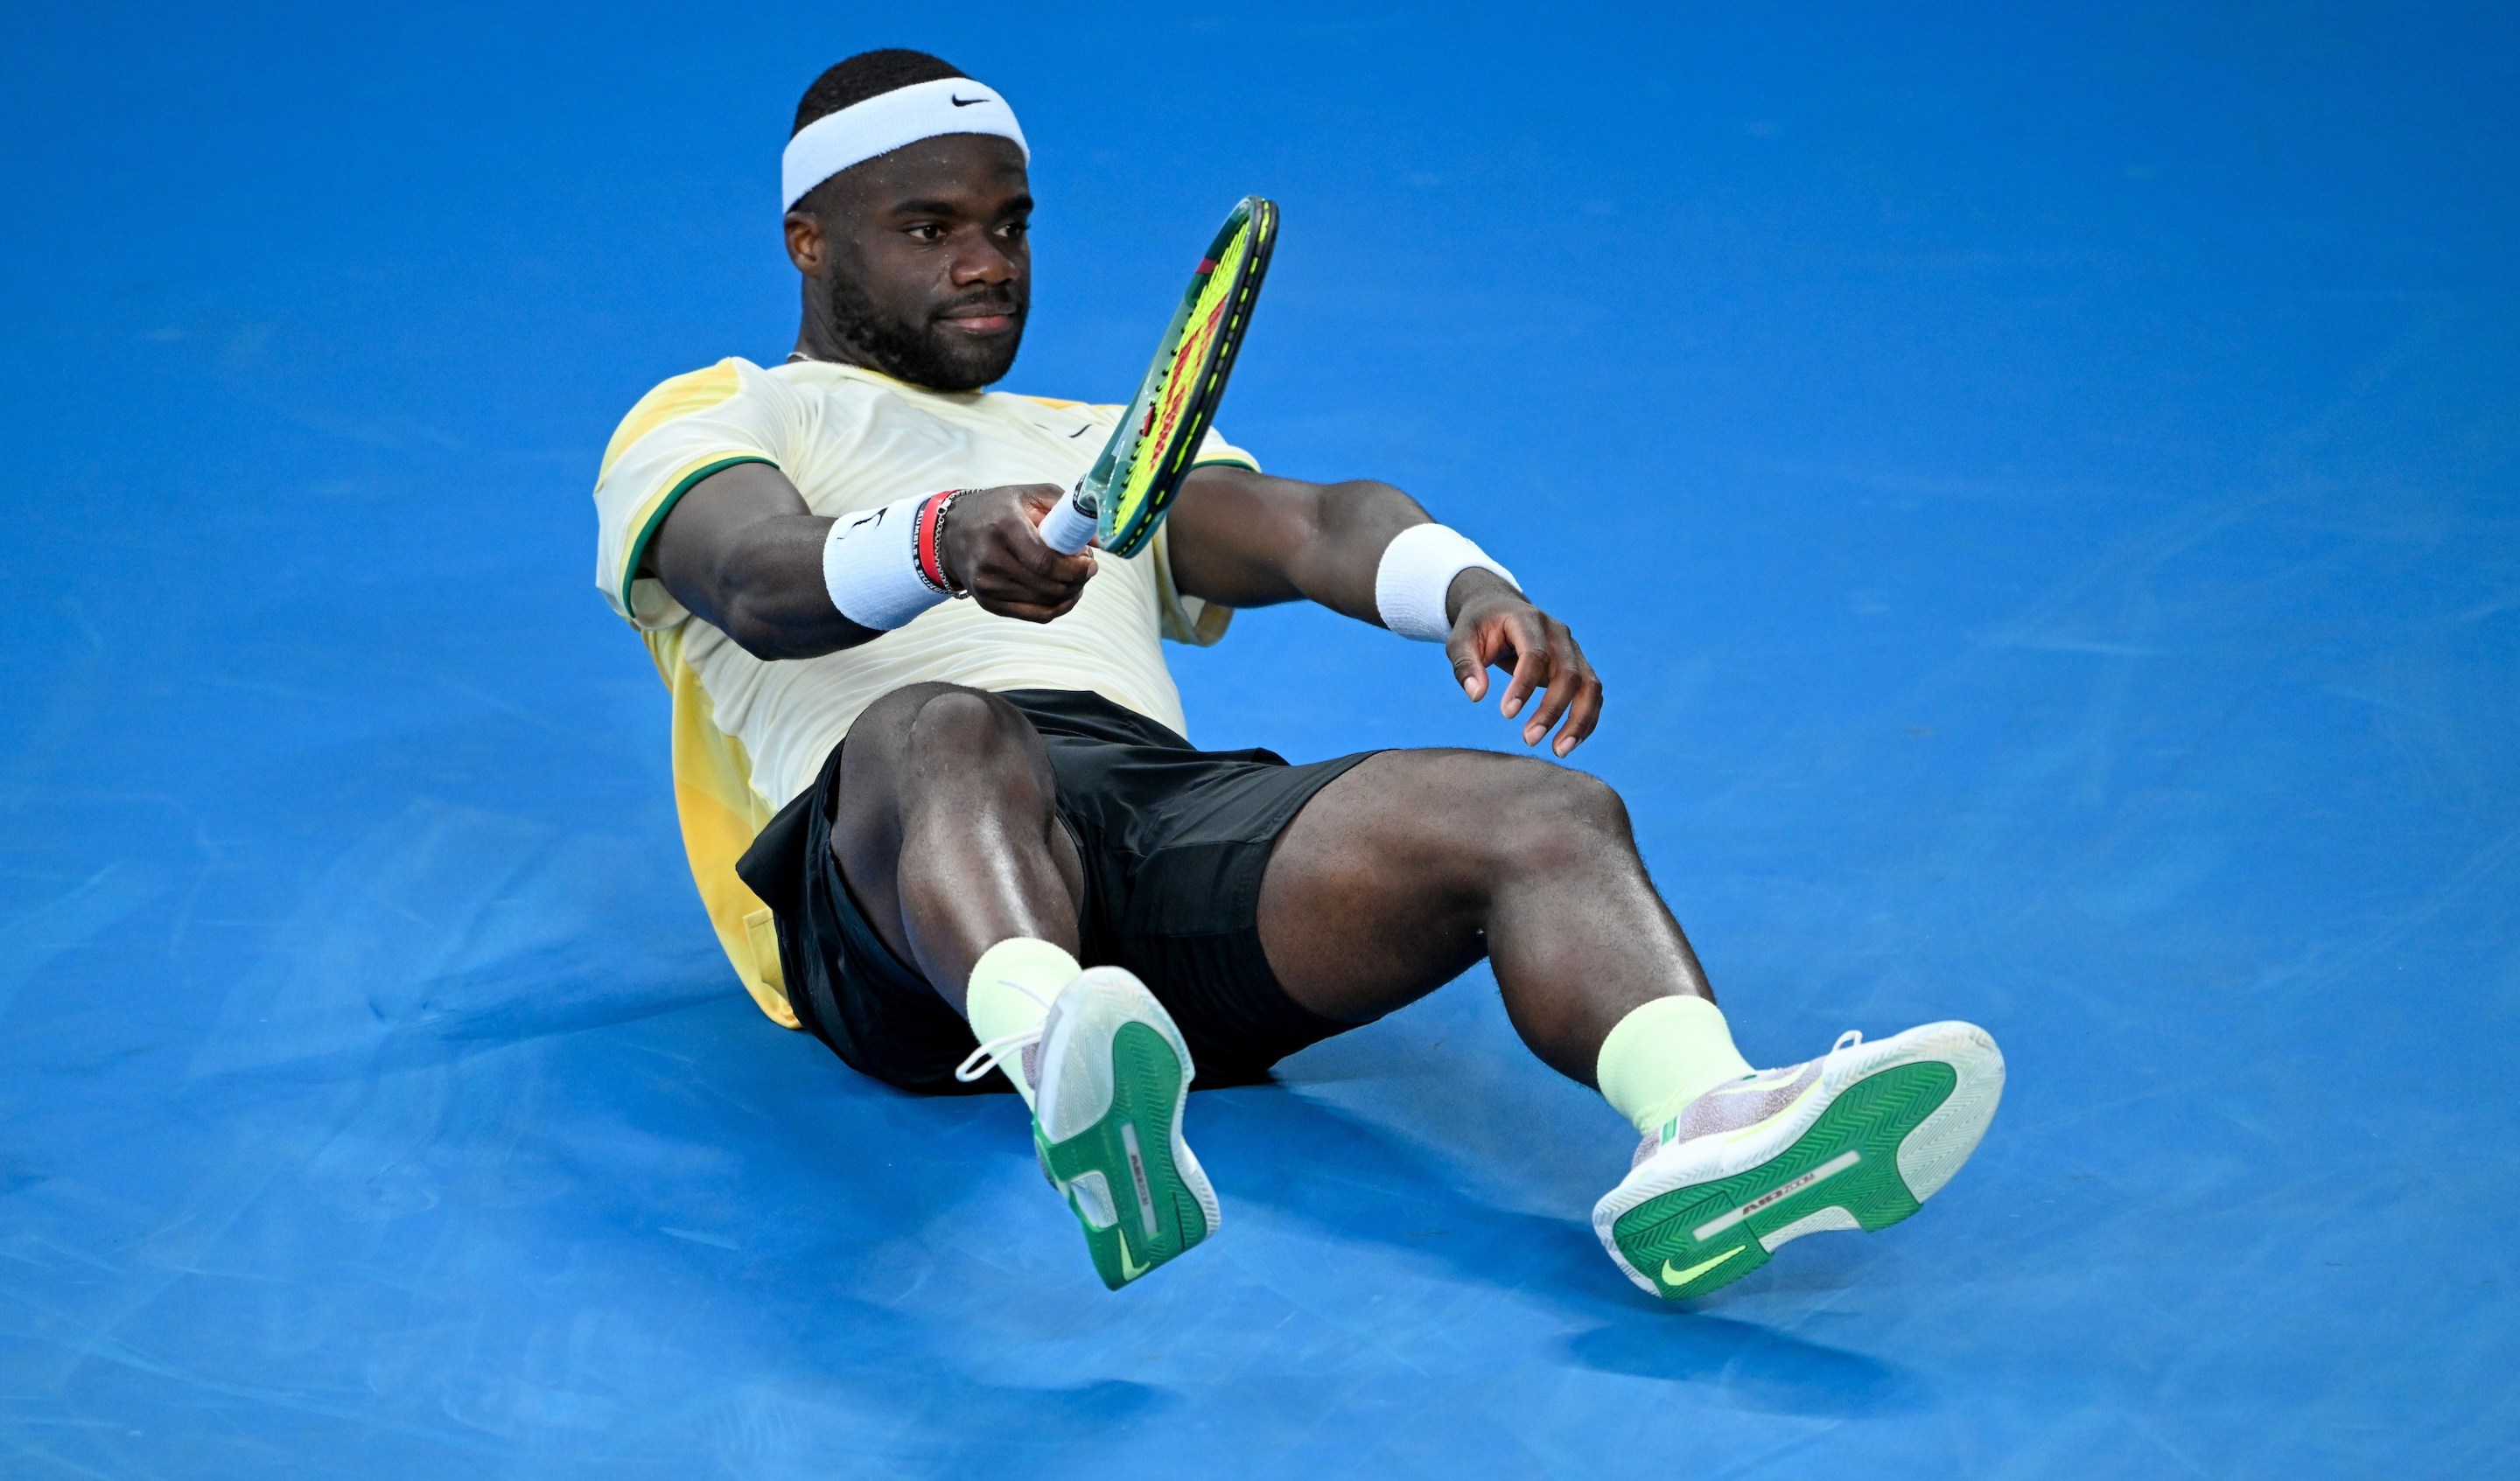 MELBOURNE, AUSTRALIA - JANUARY 17: Frances Tiafoe of the United States falls to ground in the round two men's singles match against Tomas Machac of the Czech Republic during the 2024 Australian Open at Melbourne Park on January 17, 2024 in Melbourne, Australia. (Photo by Will Murray/Getty Images)